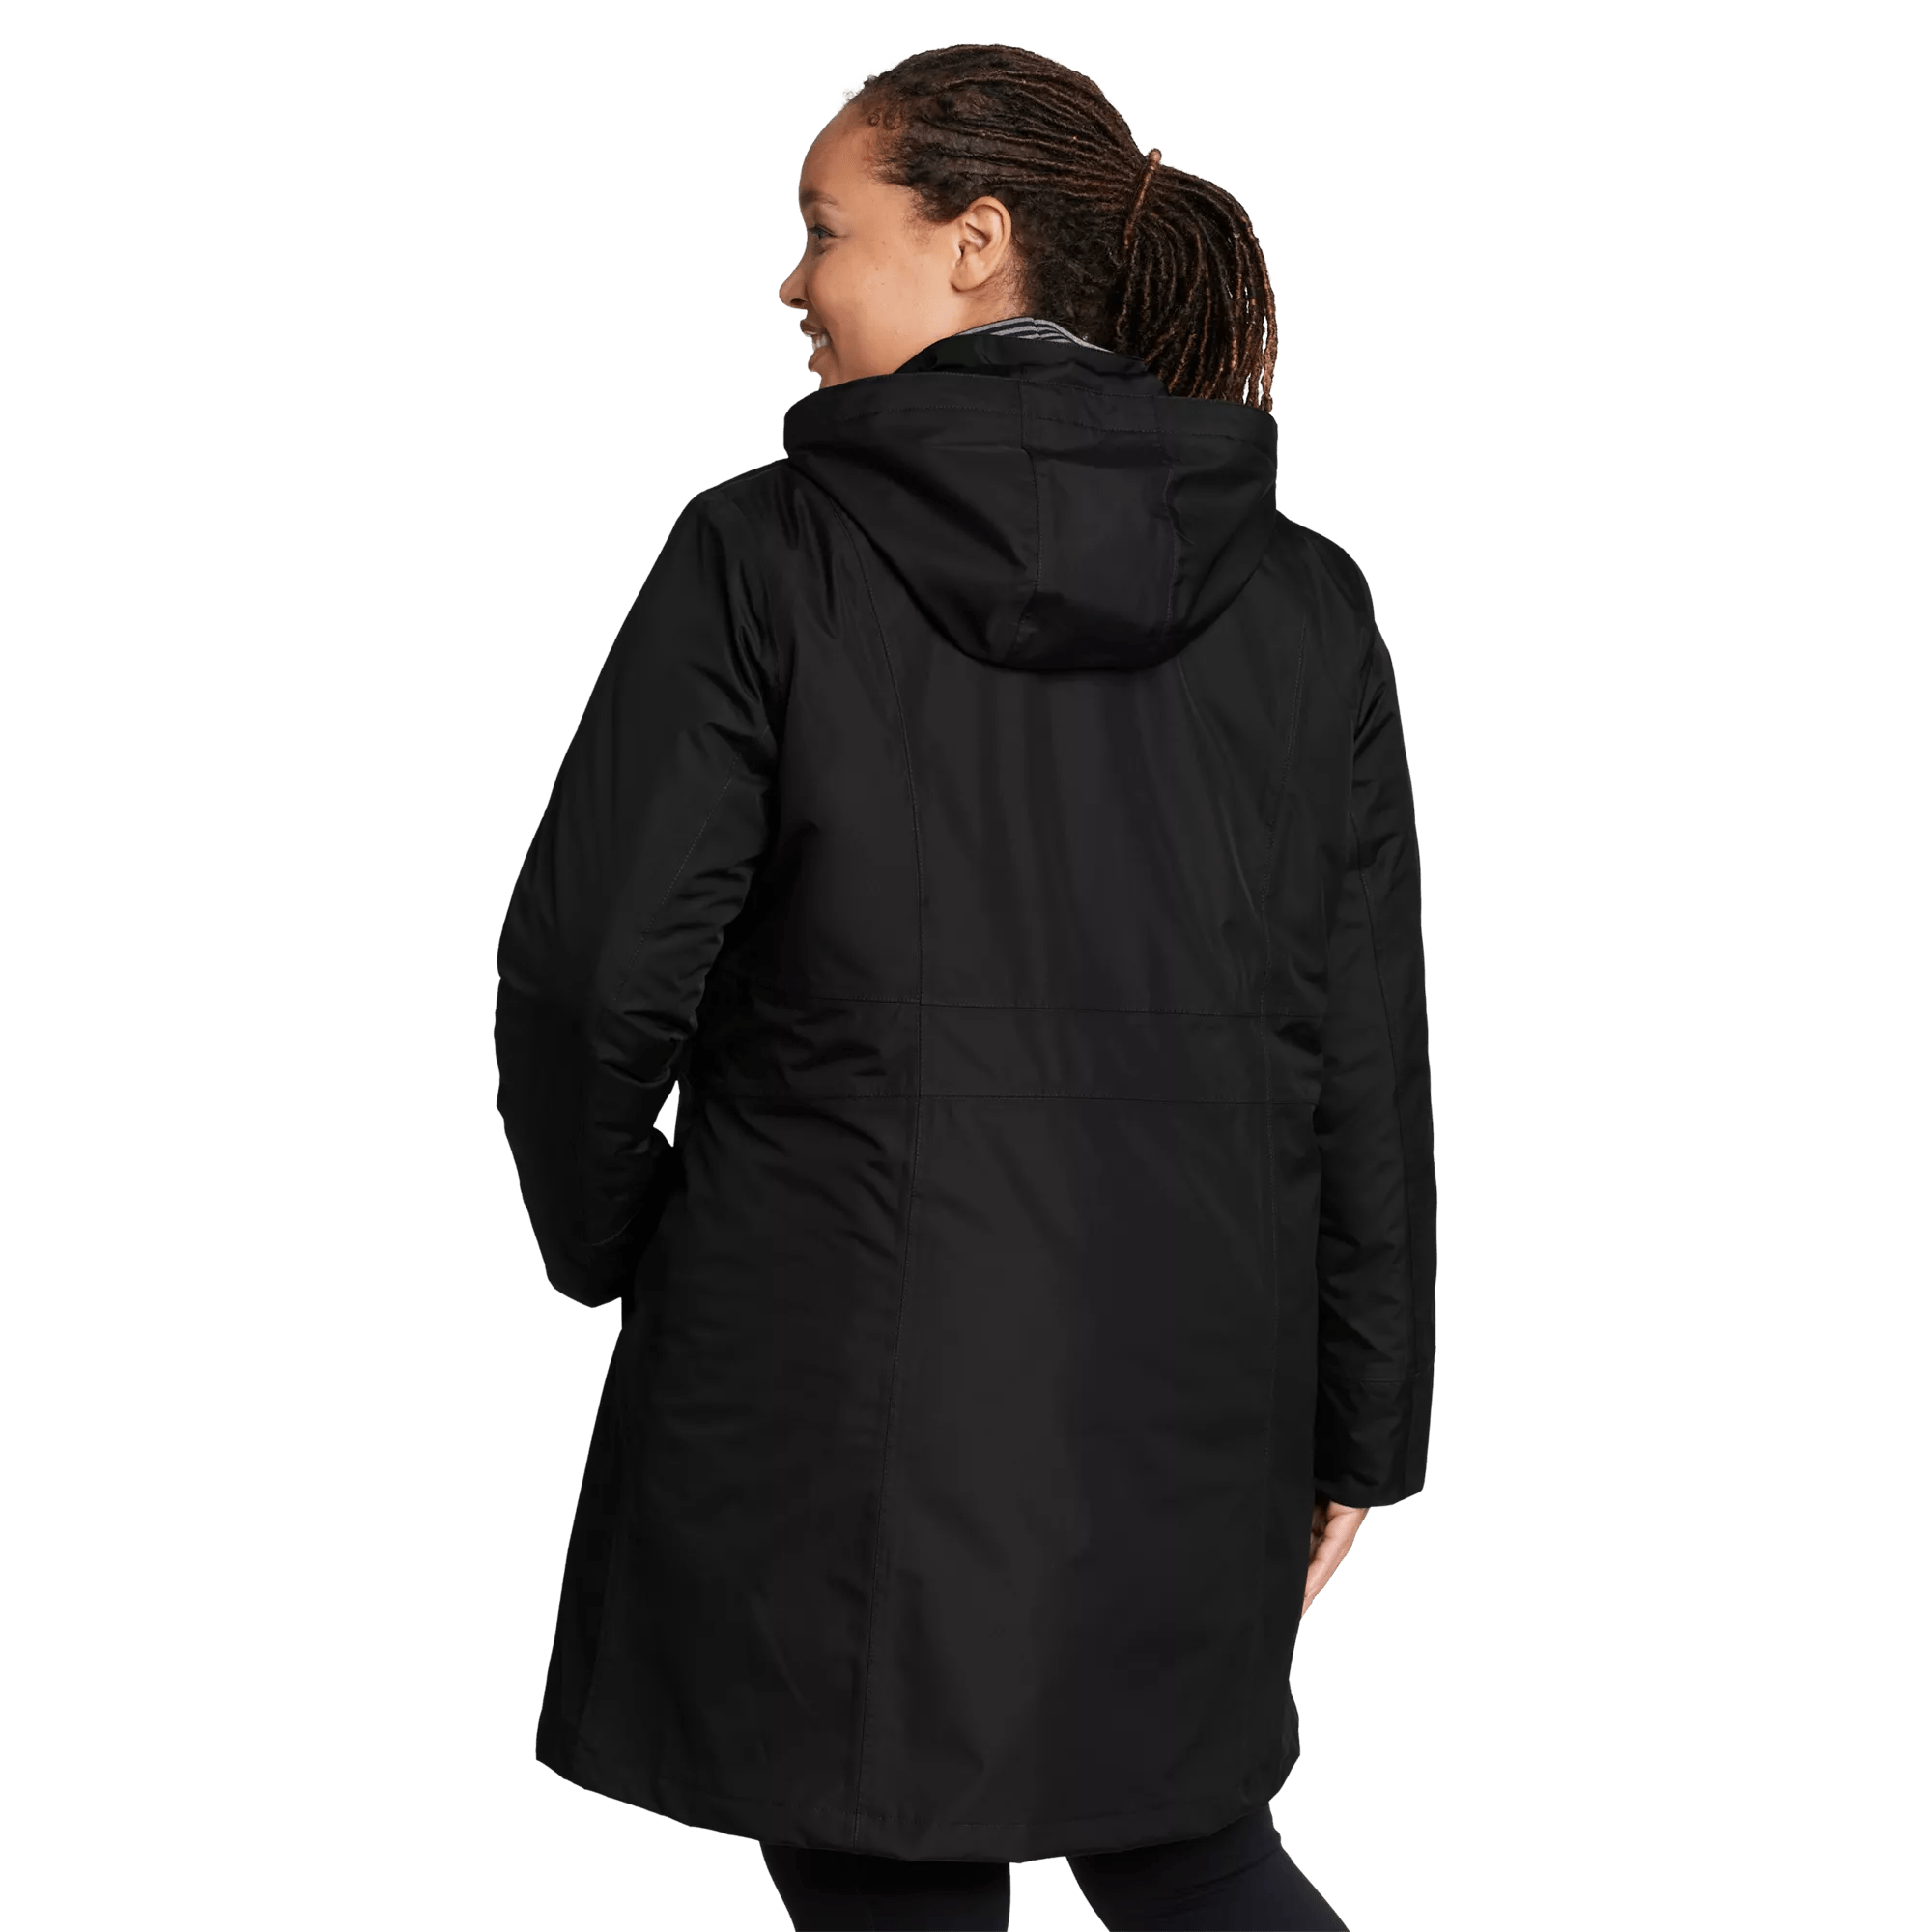 Girl On The Go Insulated Trench Coat